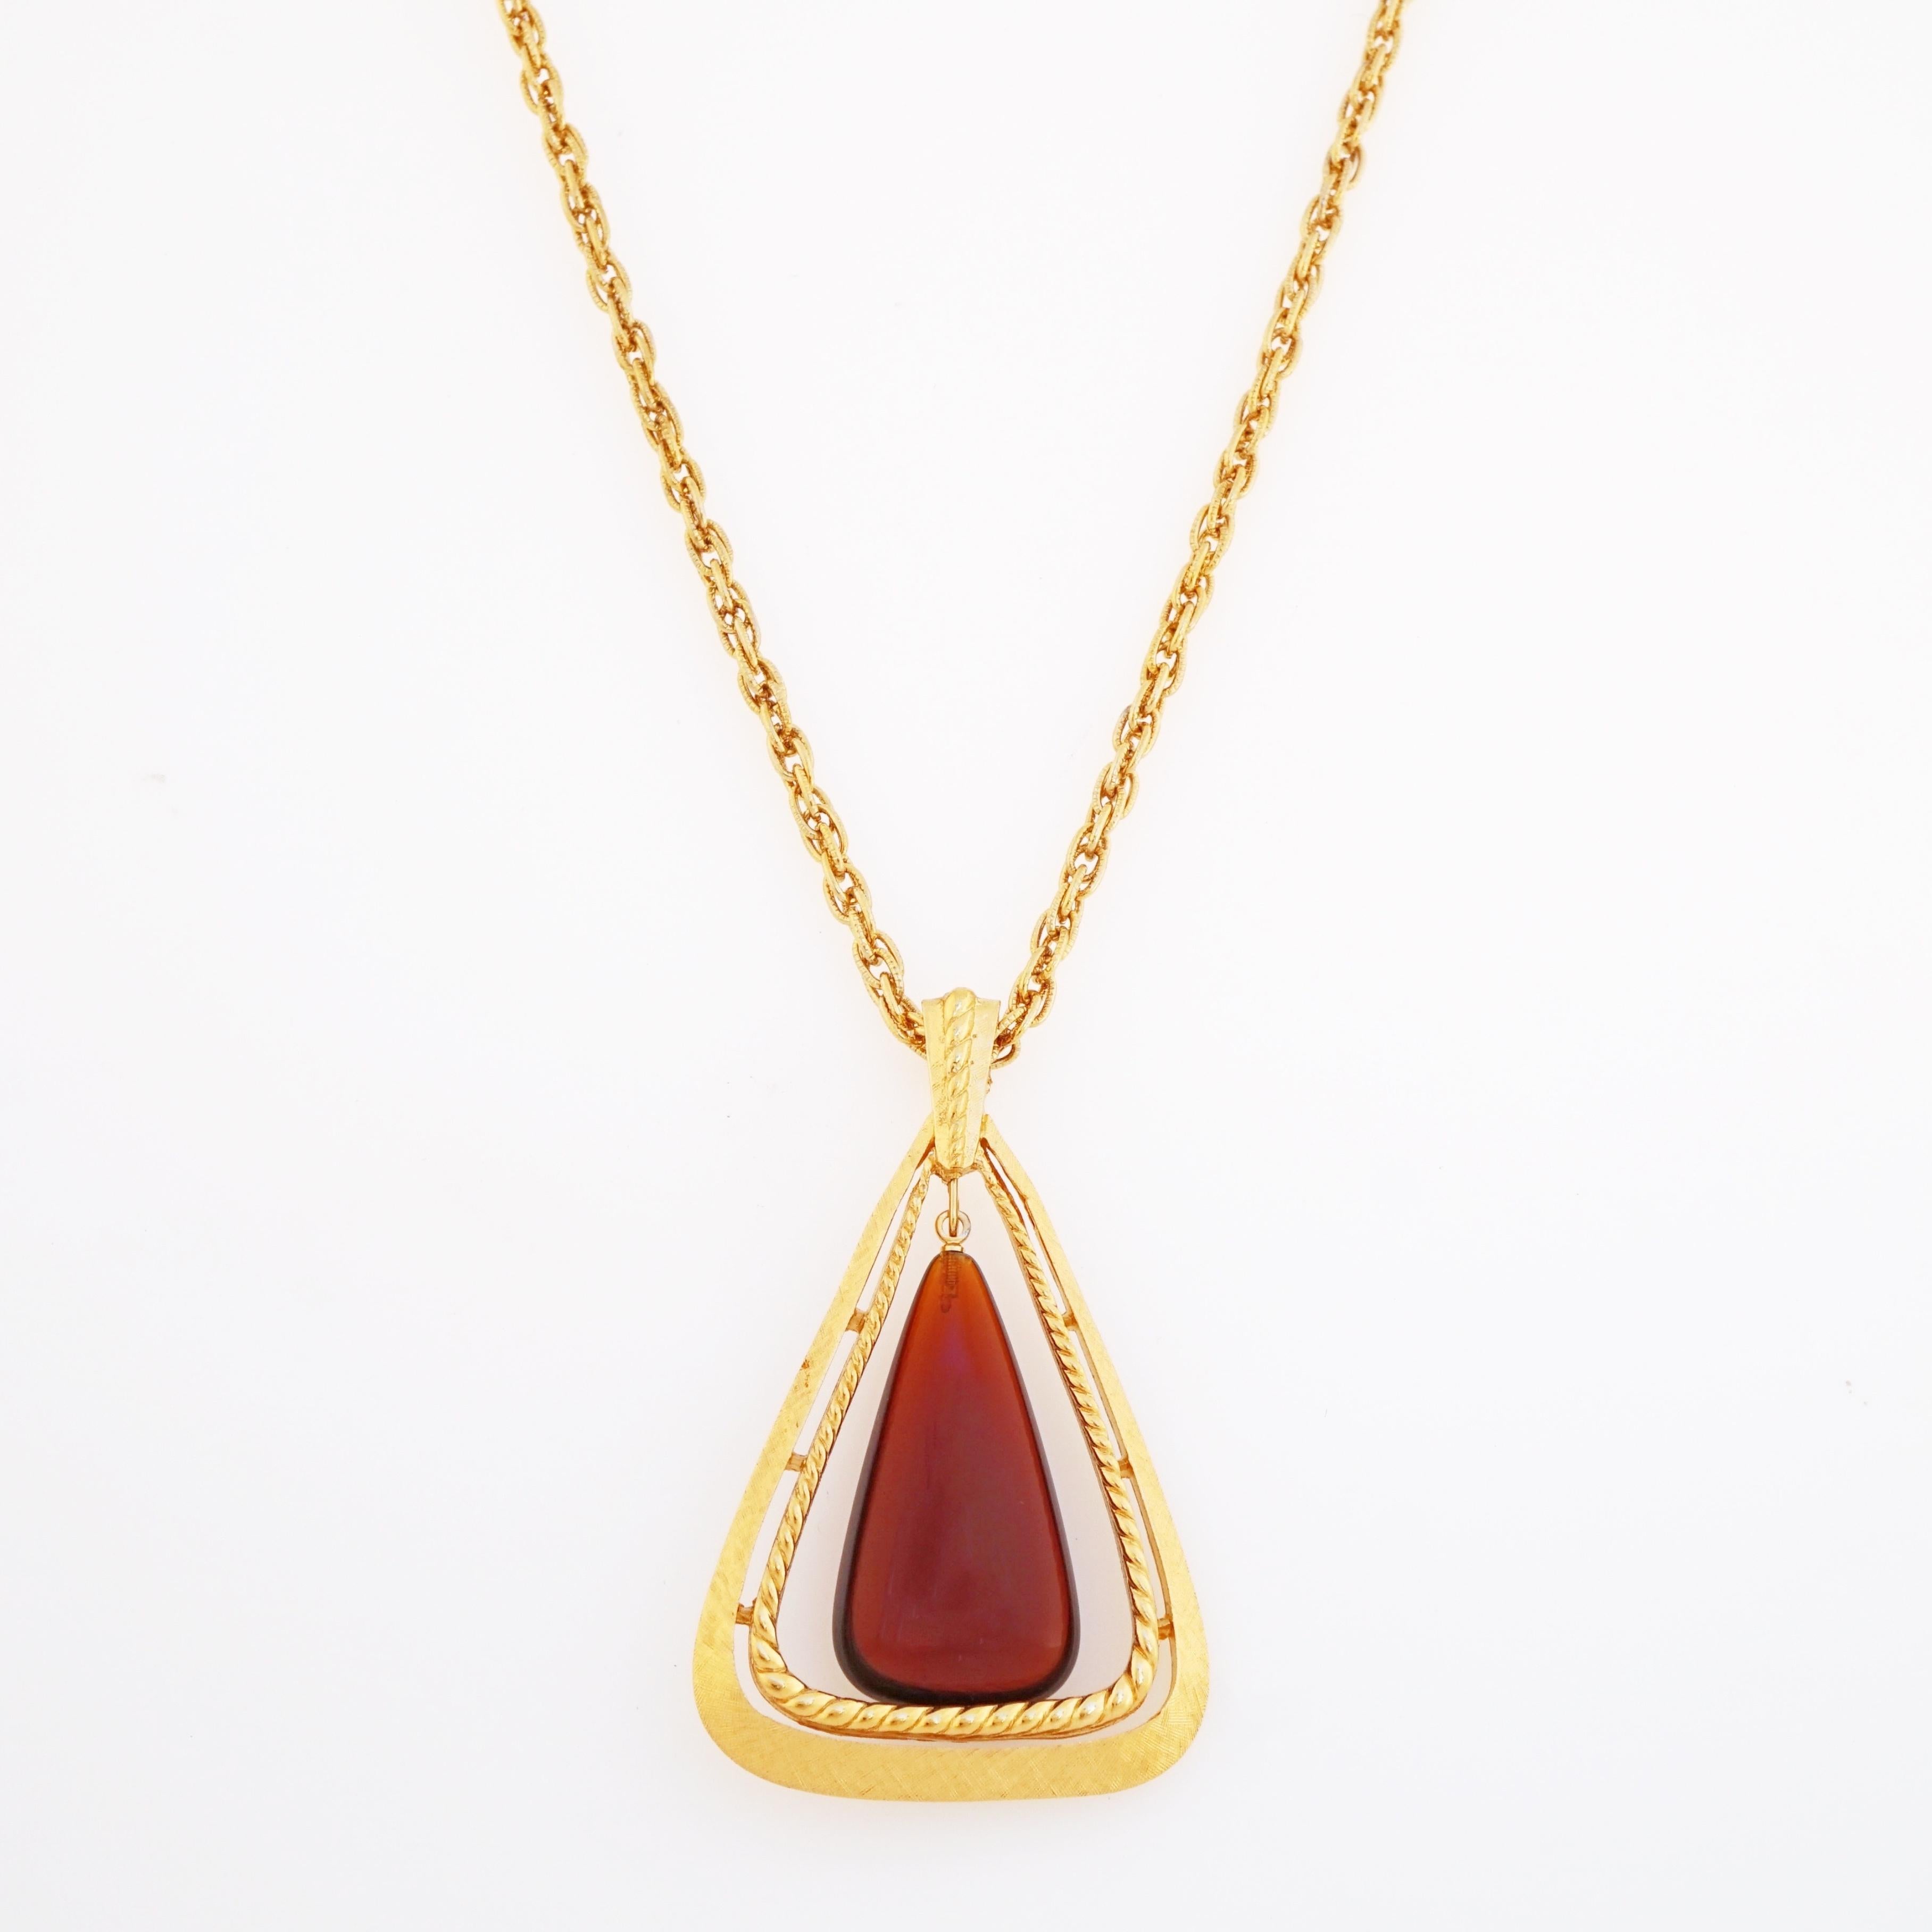 Gilded Modernist Pendant Necklace With Lucite Dangle By Crown Trifari, 1960s In Good Condition For Sale In McKinney, TX